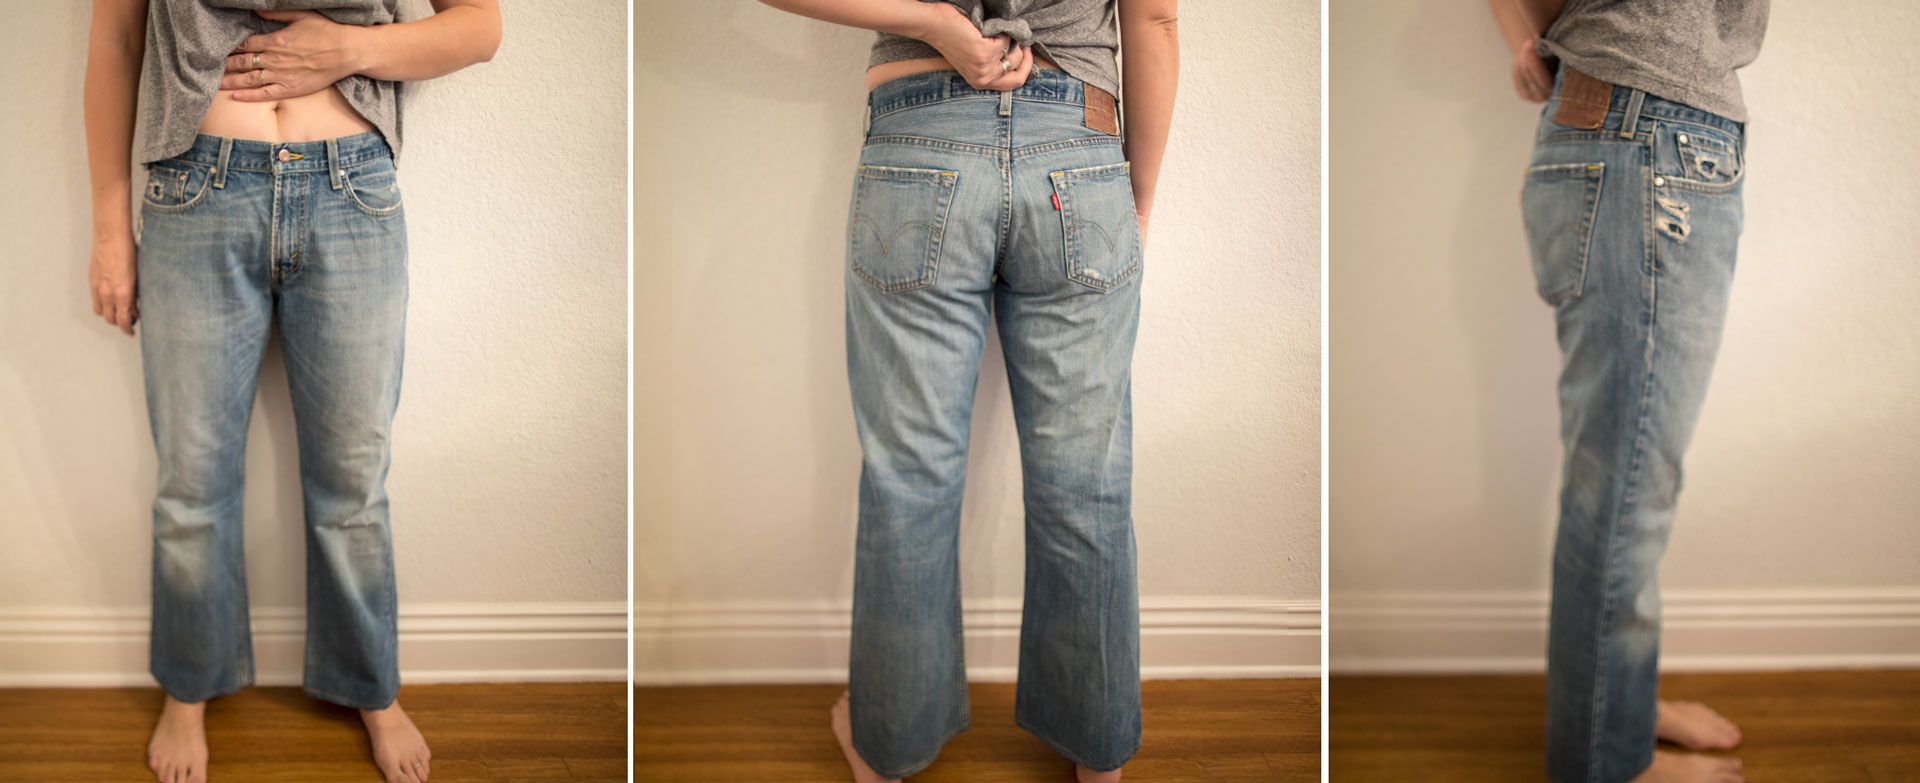 old 501 levis for sale